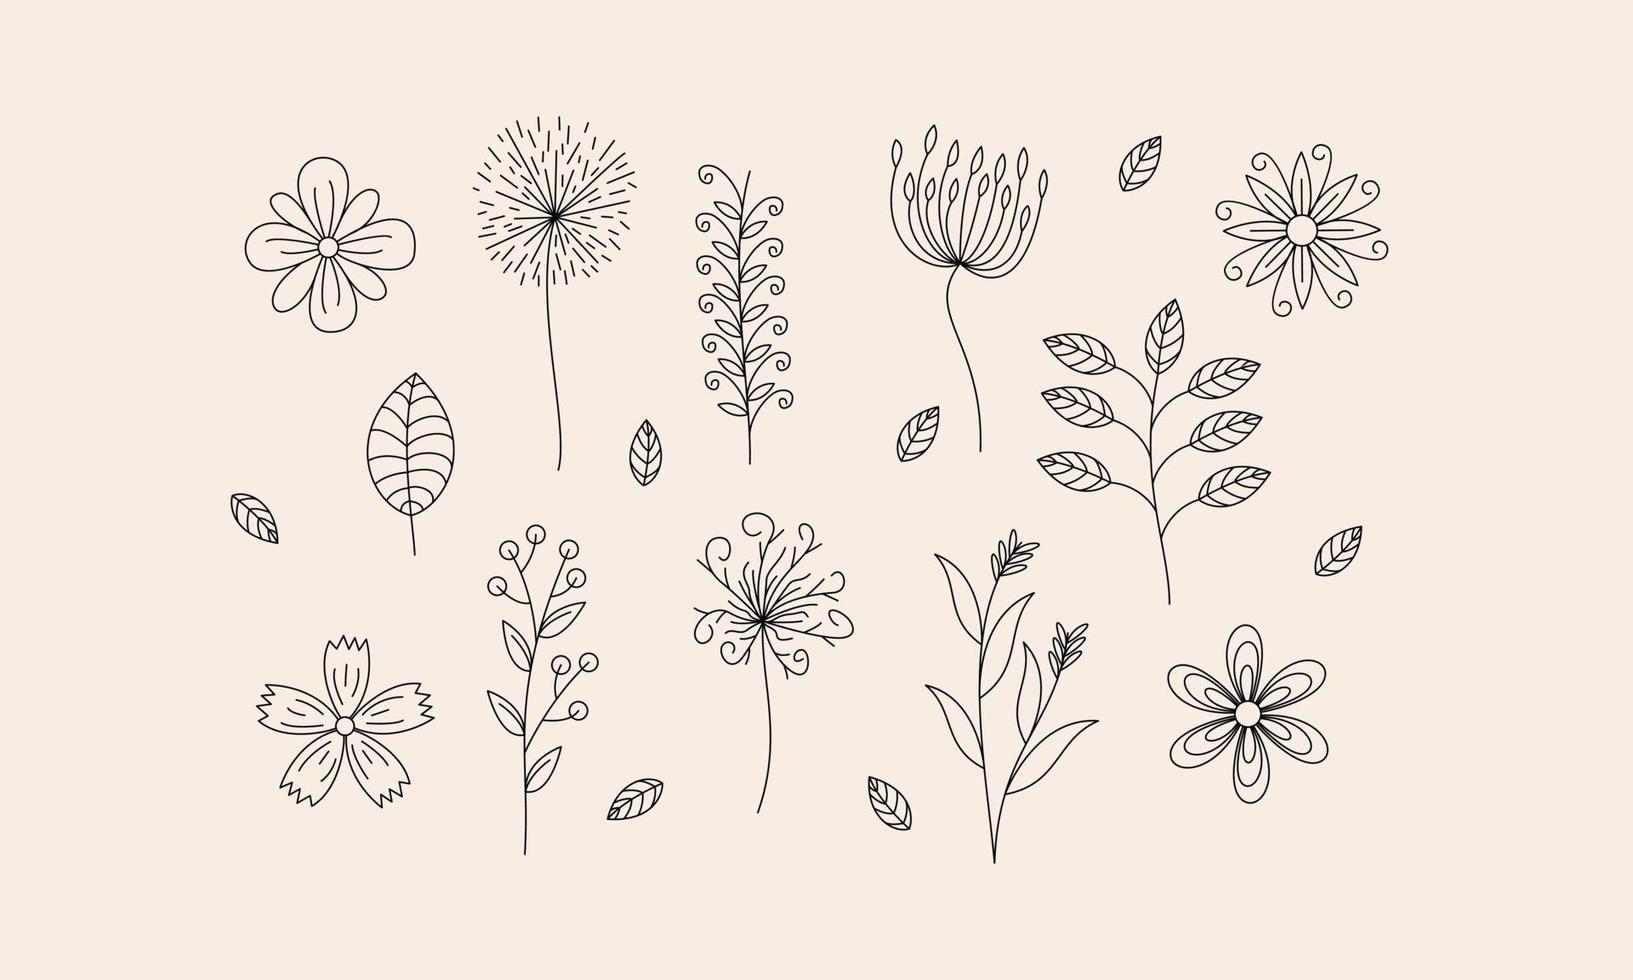 Hand drawn flower and branches doodle vector